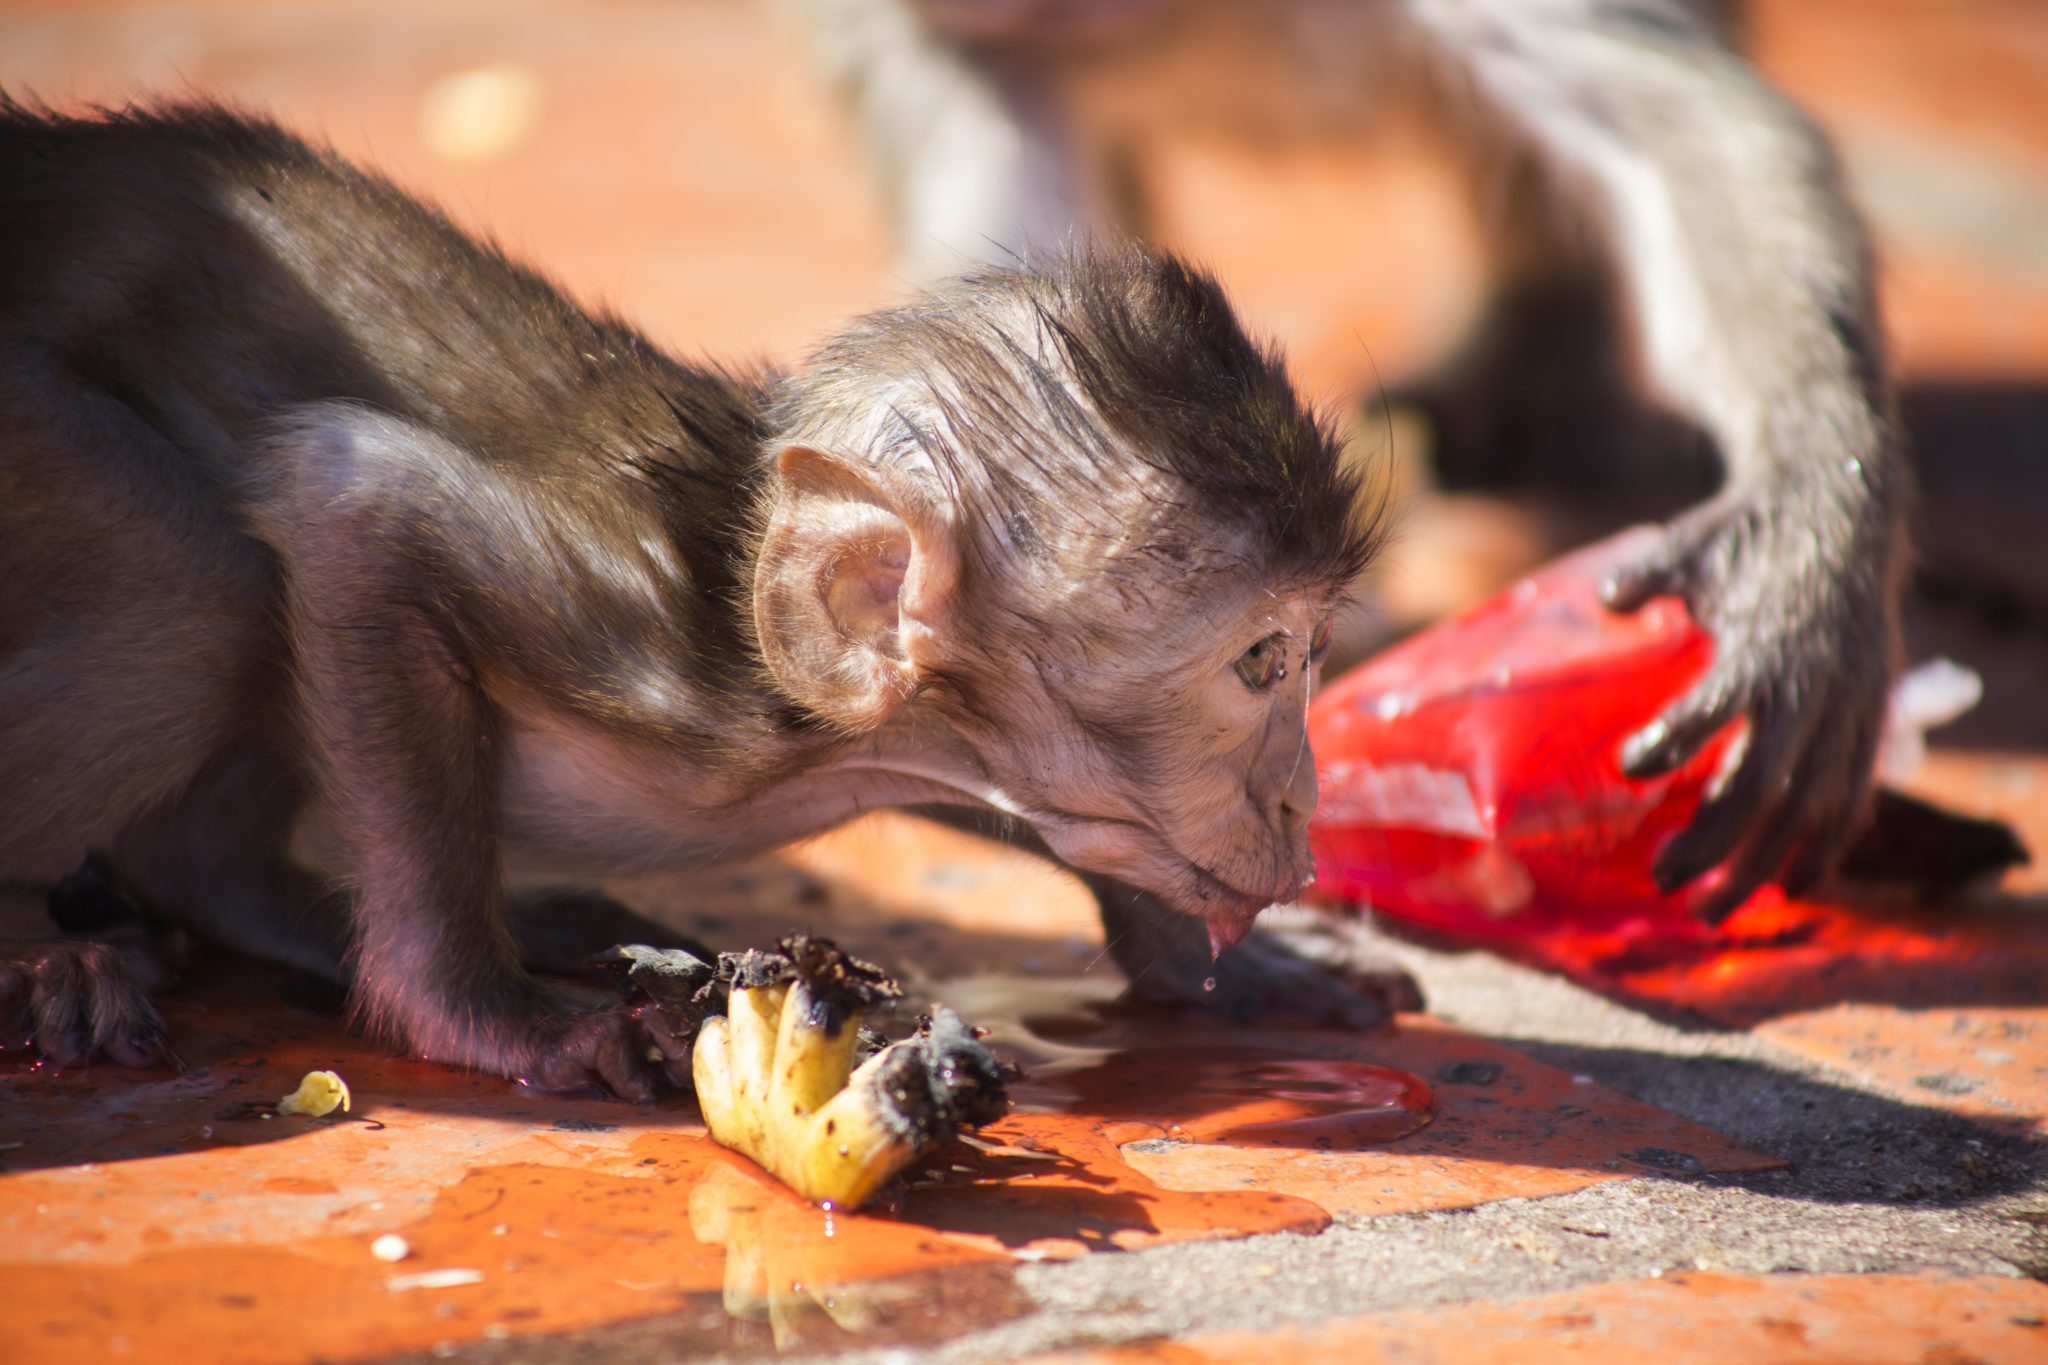 crab eating macaque